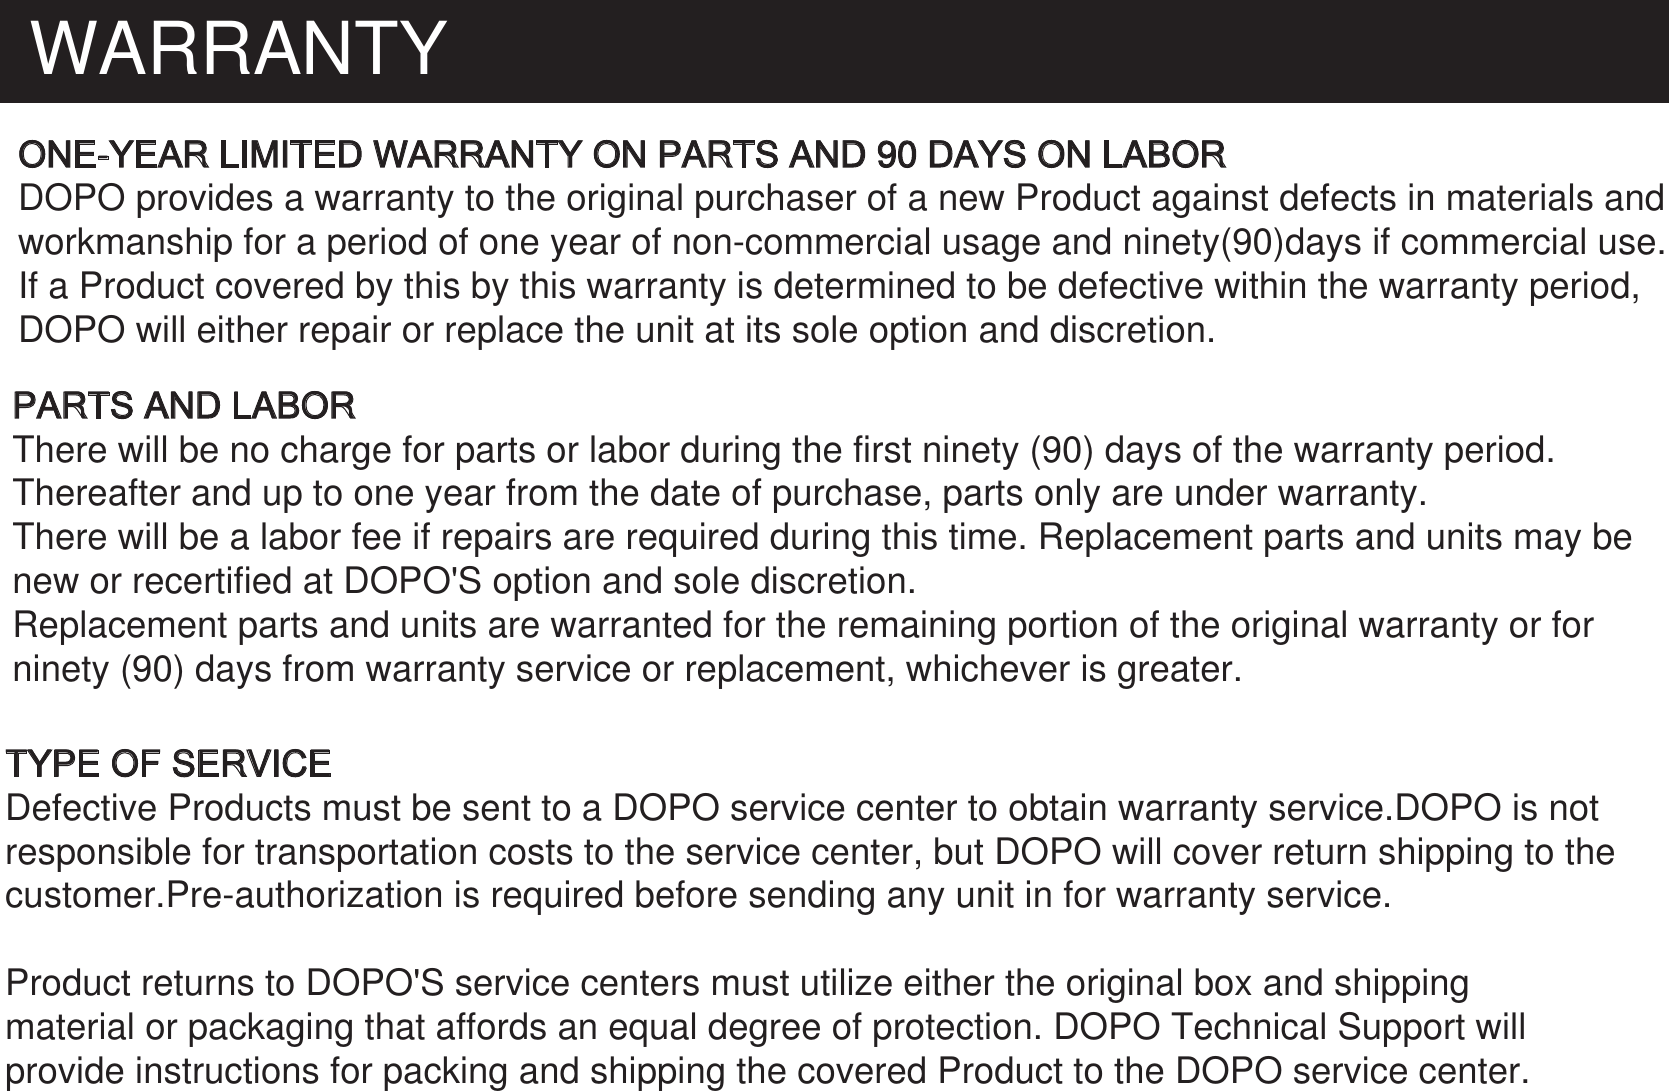 WARRANTYONE-YEAR LIMITED WARRANTY ON PARTS AND 90 DAYS ON LABORDOPO provides a warranty to the original purchaser of a new Product against defects in materials and workmanship for a period of one year of non-commercial usage and ninety(90)days if commercial use.If a Product covered by this by this warranty is determined to be defective within the warranty period, DOPO will either repair or replace the unit at its sole option and discretion. PARTS AND LABORThere will be no charge for parts or labor during the first ninety (90) days of the warranty period. Thereafter and up to one year from the date of purchase, parts only are under warranty. There will be a labor fee if repairs are required during this time. Replacement parts and units may be new or recertified at DOPO&apos;S option and sole discretion.Replacement parts and units are warranted for the remaining portion of the original warranty or for ninety (90) days from warranty service or replacement, whichever is greater.TYPE OF SERVICEDefective Products must be sent to a DOPO service center to obtain warranty service.DOPO is notresponsible for transportation costs to the service center, but DOPO will cover return shipping to the customer.Pre-authorization is required before sending any unit in for warranty service.Product returns to DOPO&apos;S service centers must utilize either the original box and shipping material or packaging that affords an equal degree of protection. DOPO Technical Support will  provide instructions for packing and shipping the covered Product to the DOPO service center.